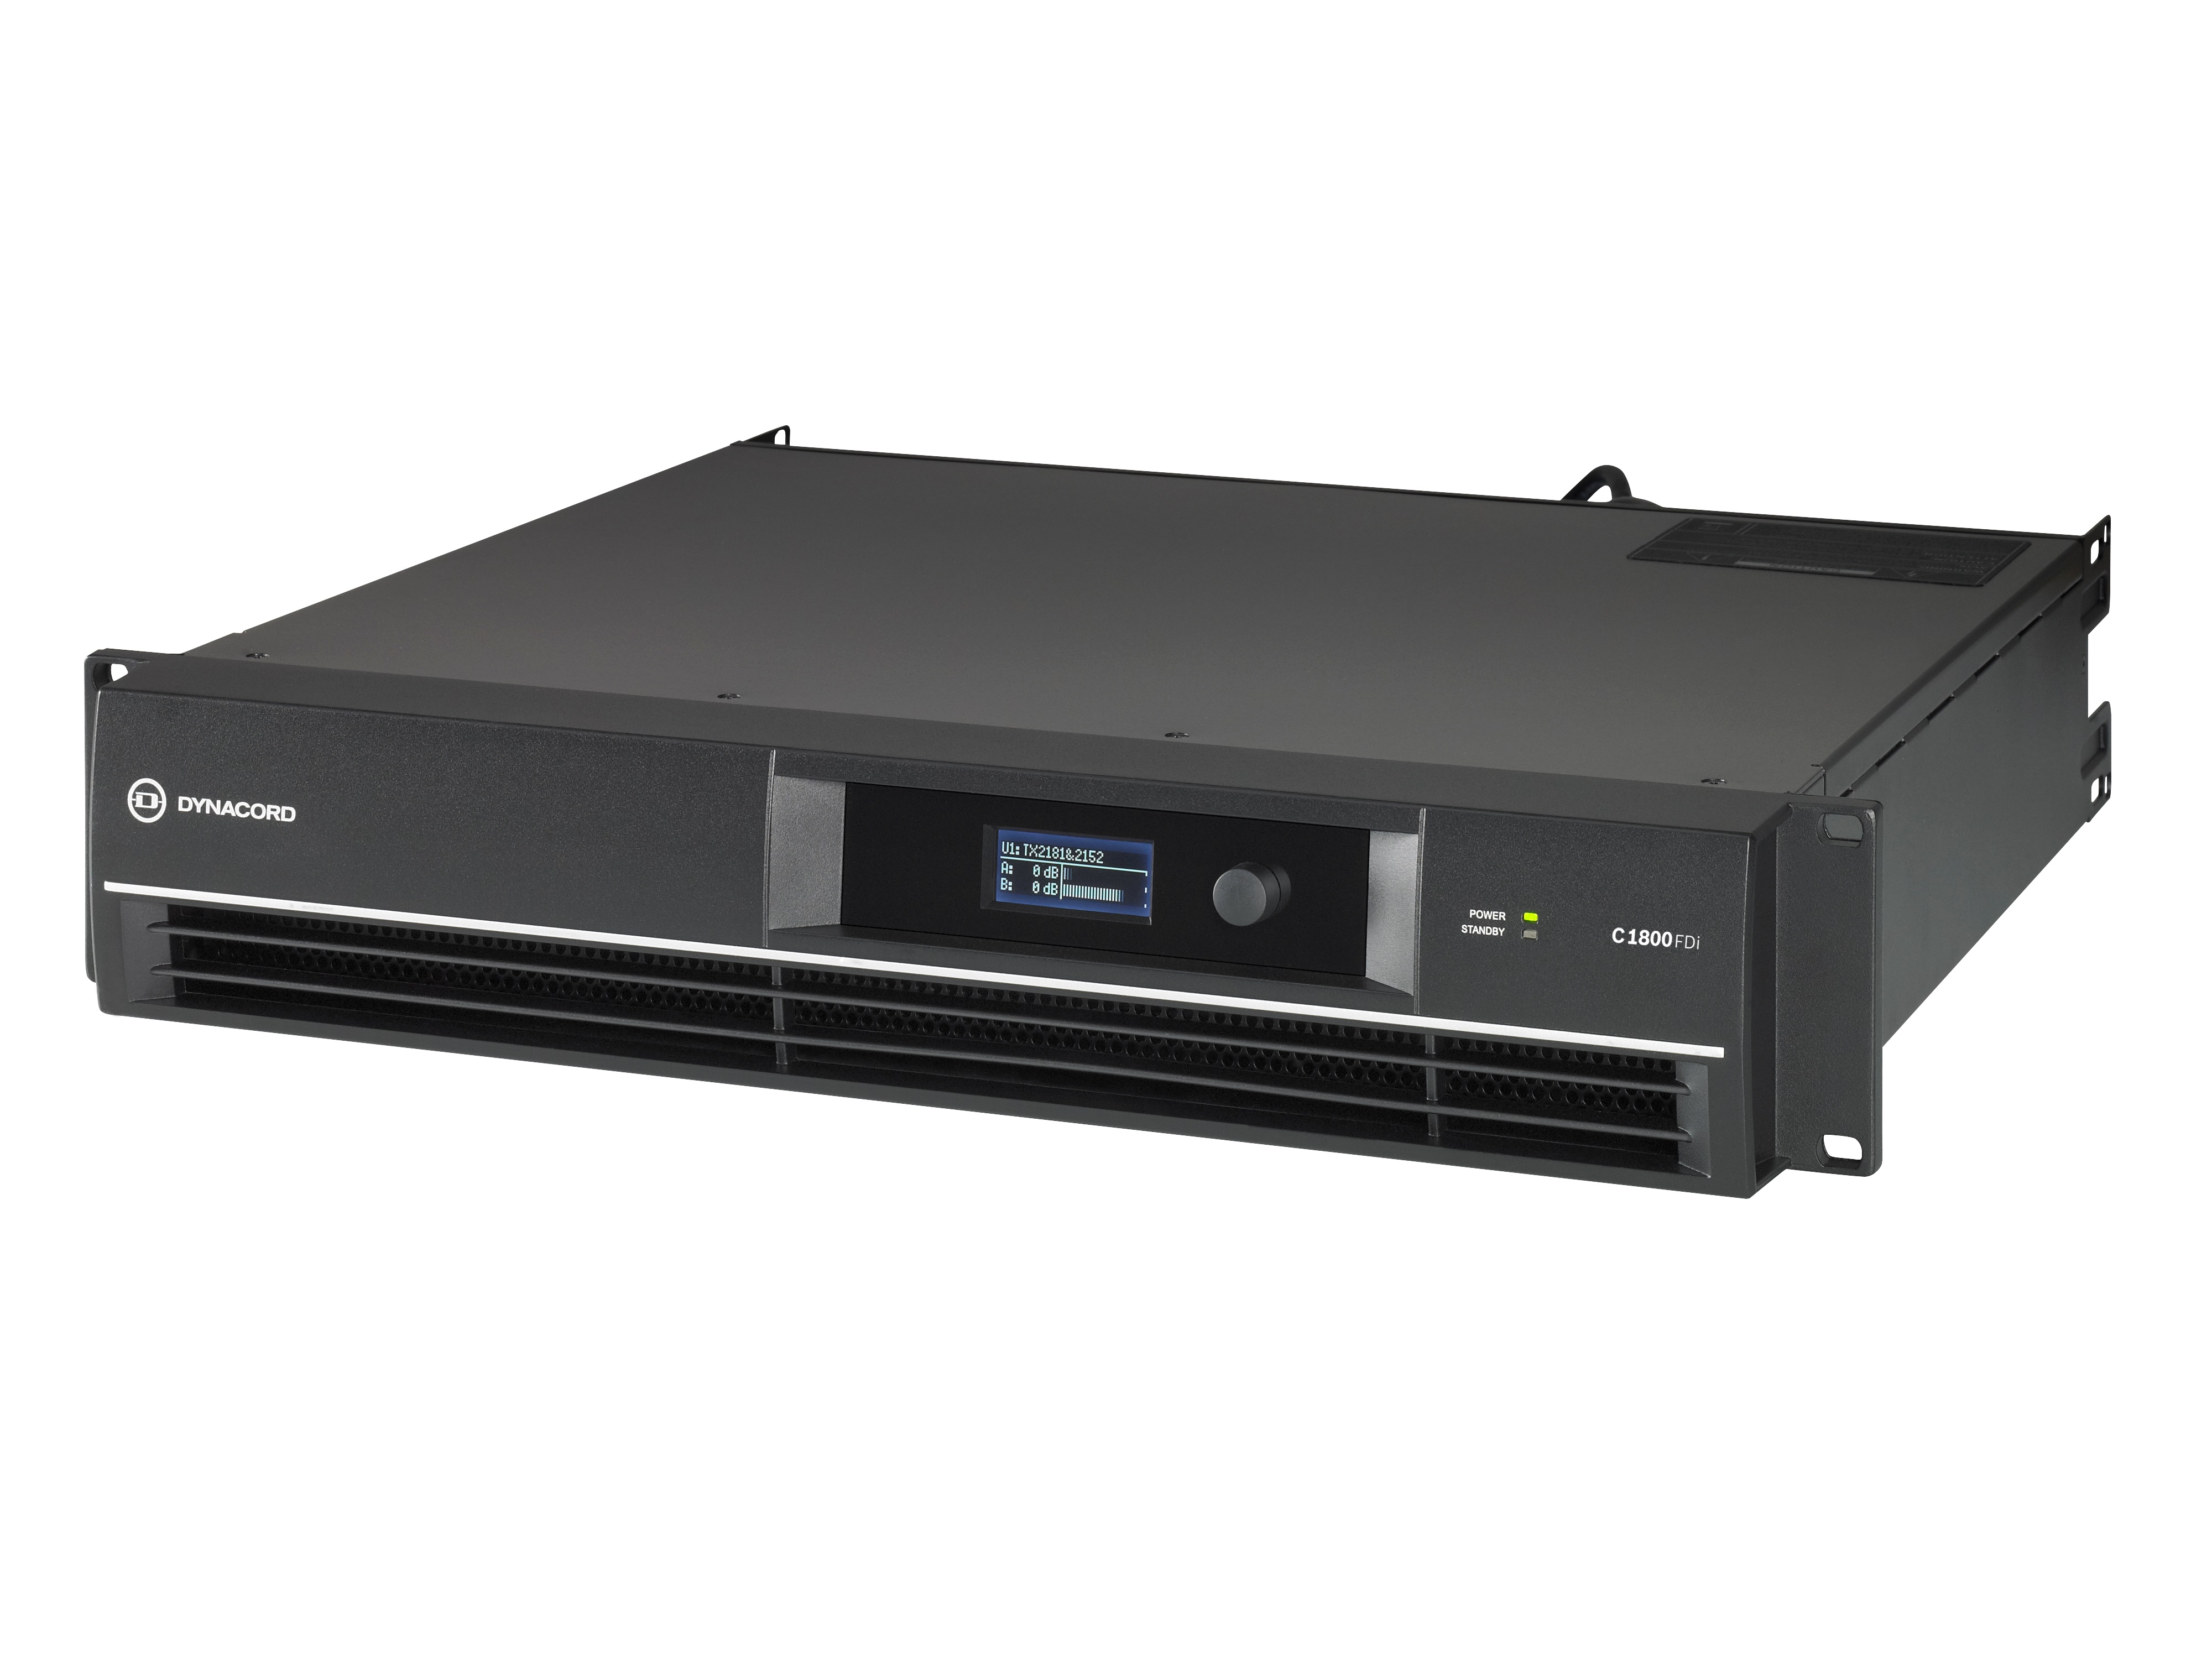 C1800FDI-US DSP Power Amplifier 2x950W/Install with FIR Drive/Phoenix Connectors by Dynacord